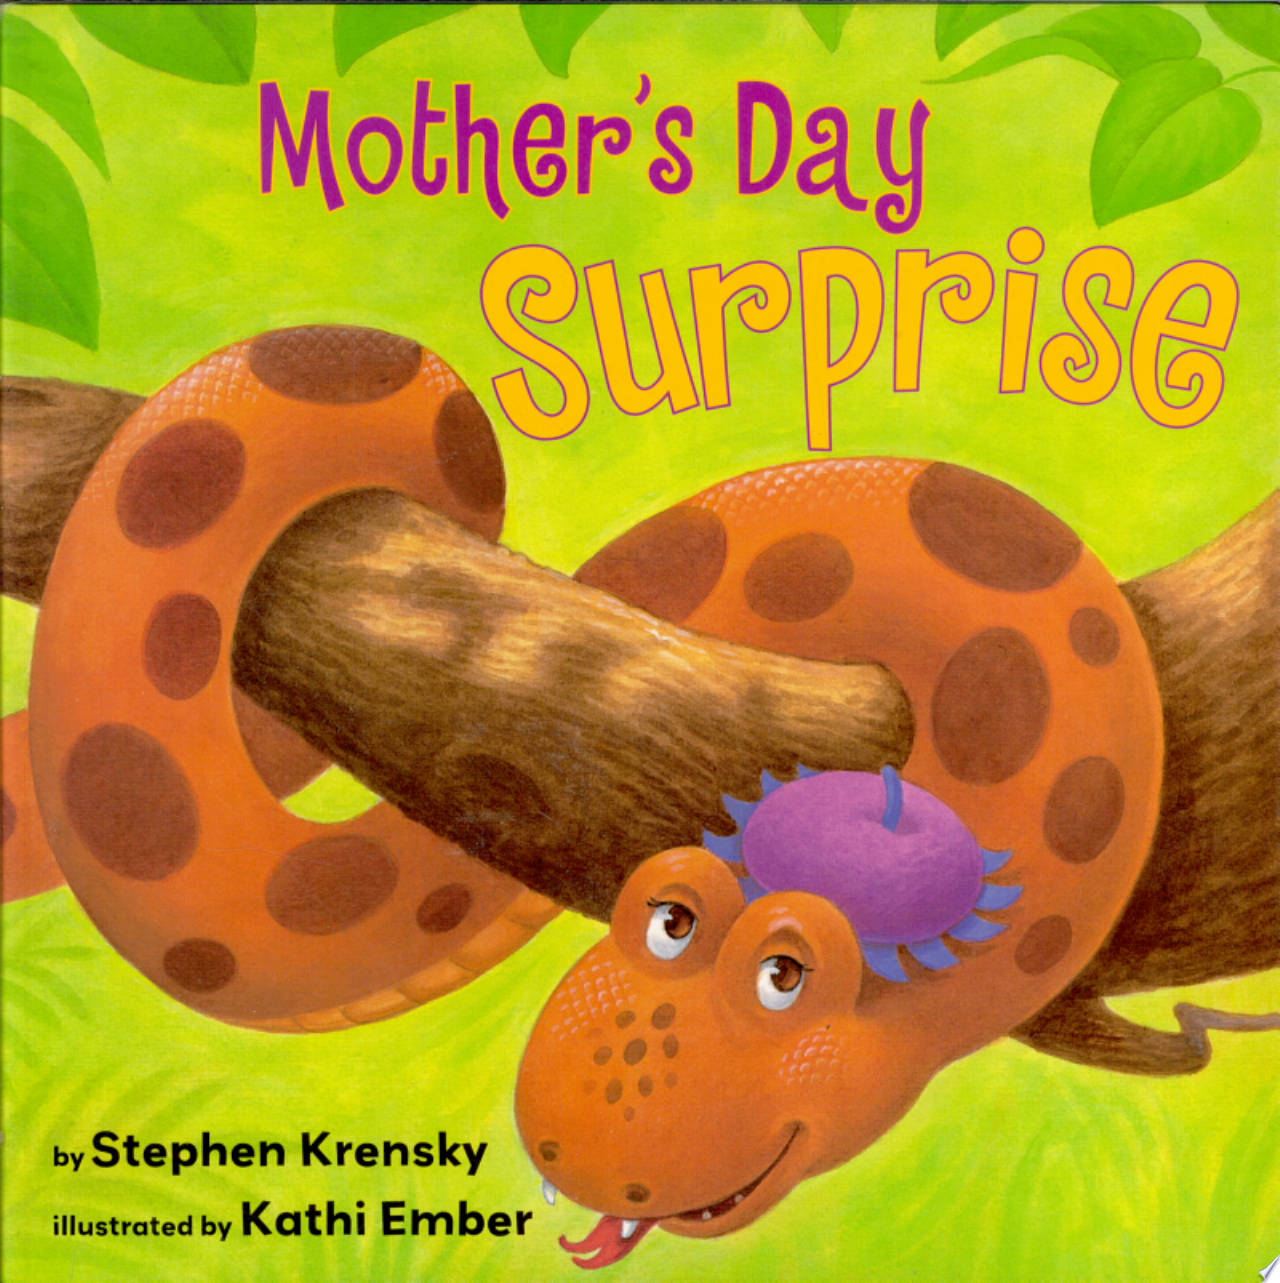 Image for "Mother's Day Surprise"